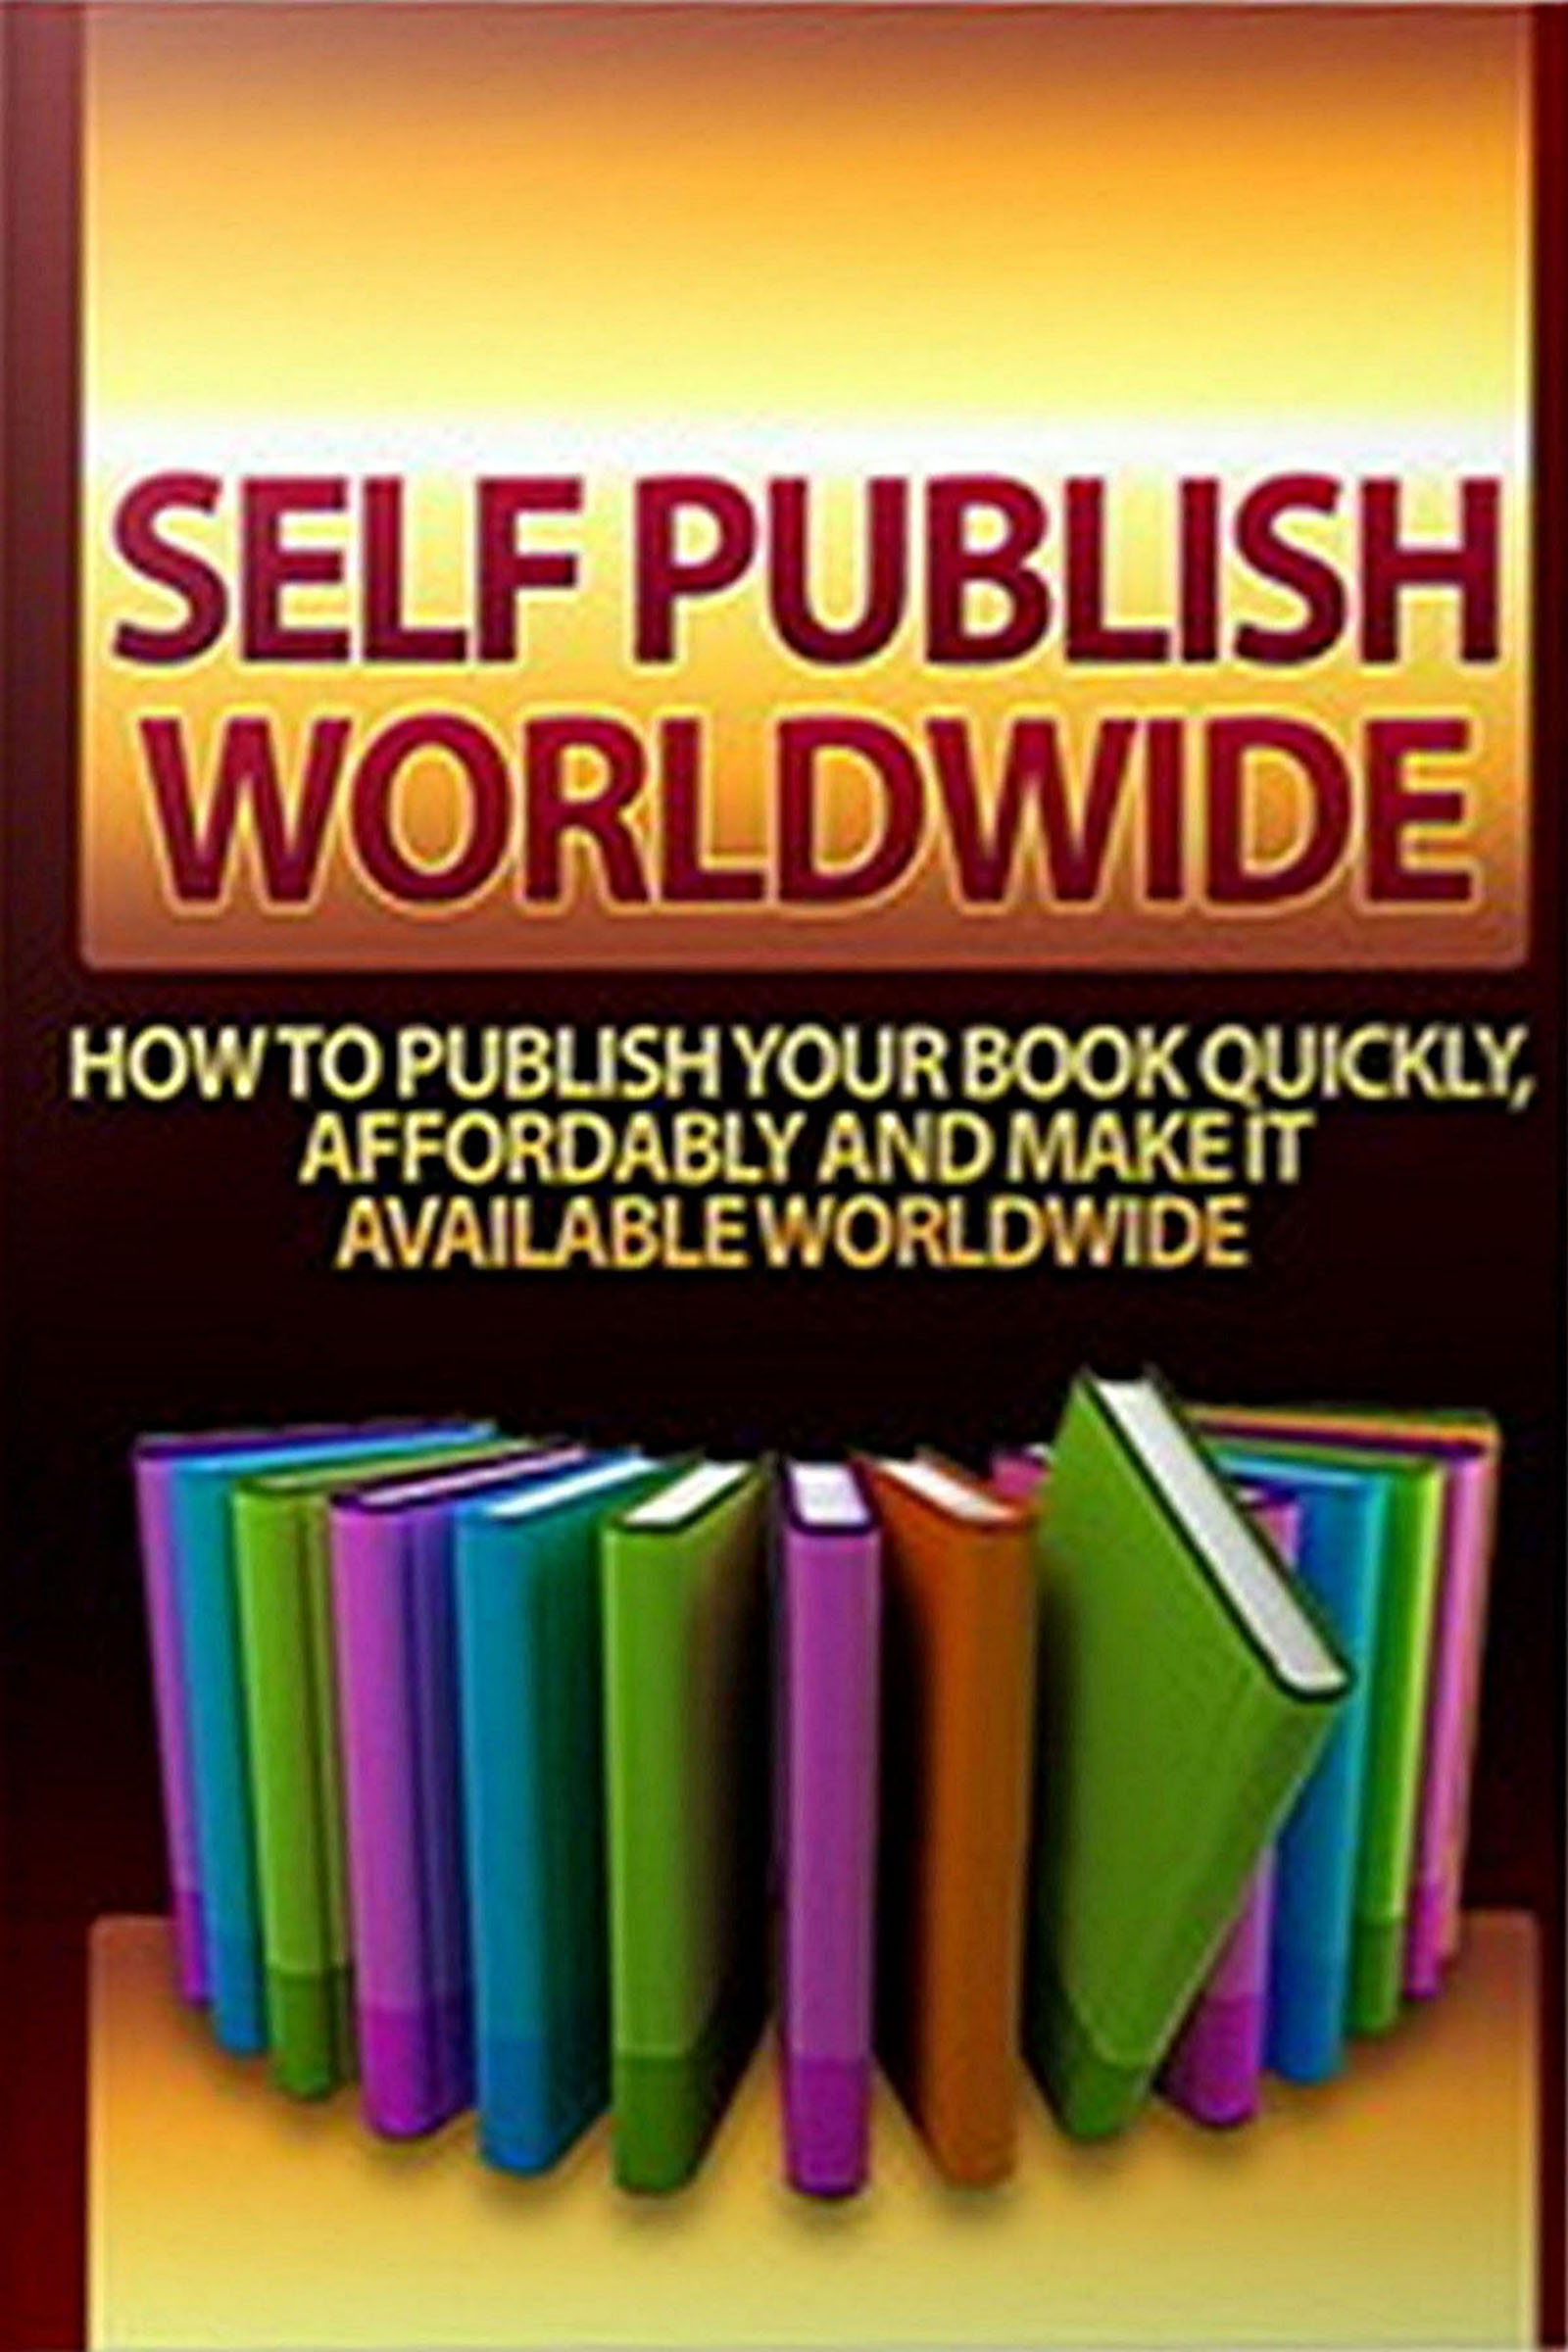 Self-Publish Worldwide - How to Publish Your Book Quickly, Affordably And Make it Available Worldwide